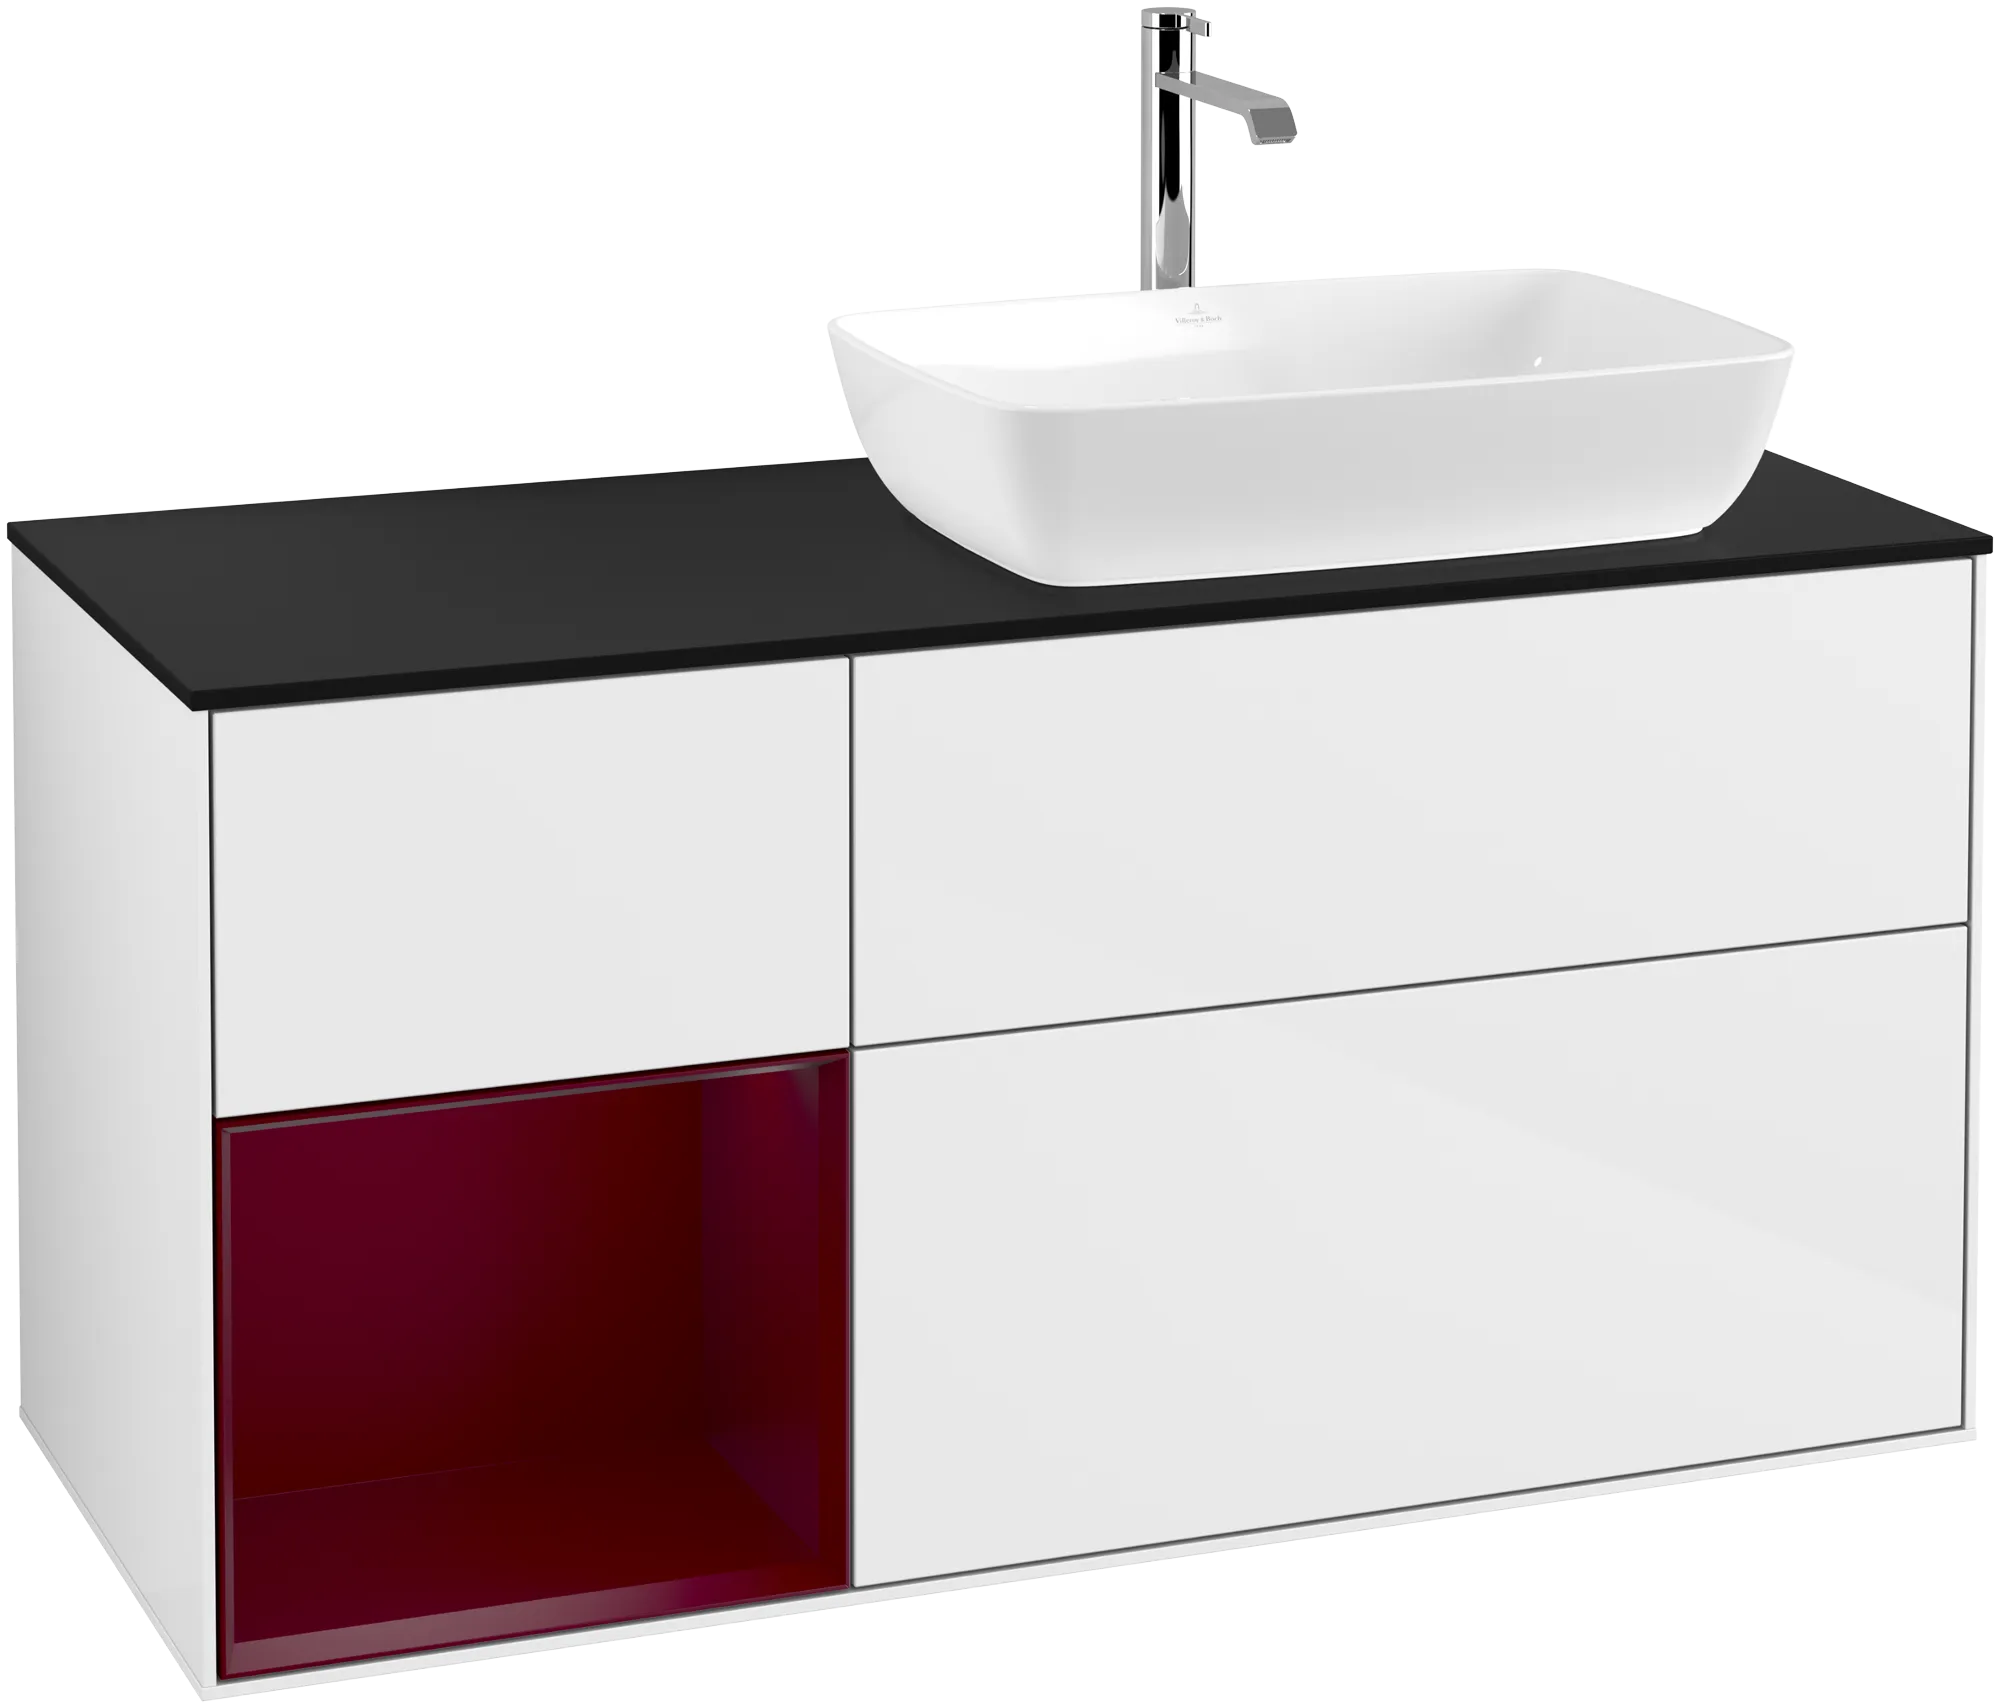 Obrázek VILLEROY BOCH Finion Vanity unit, with lighting, 3 pull-out compartments, 1200 x 603 x 501 mm, Glossy White Lacquer / Peony Matt Lacquer / Glass Black Matt #G802HBGF